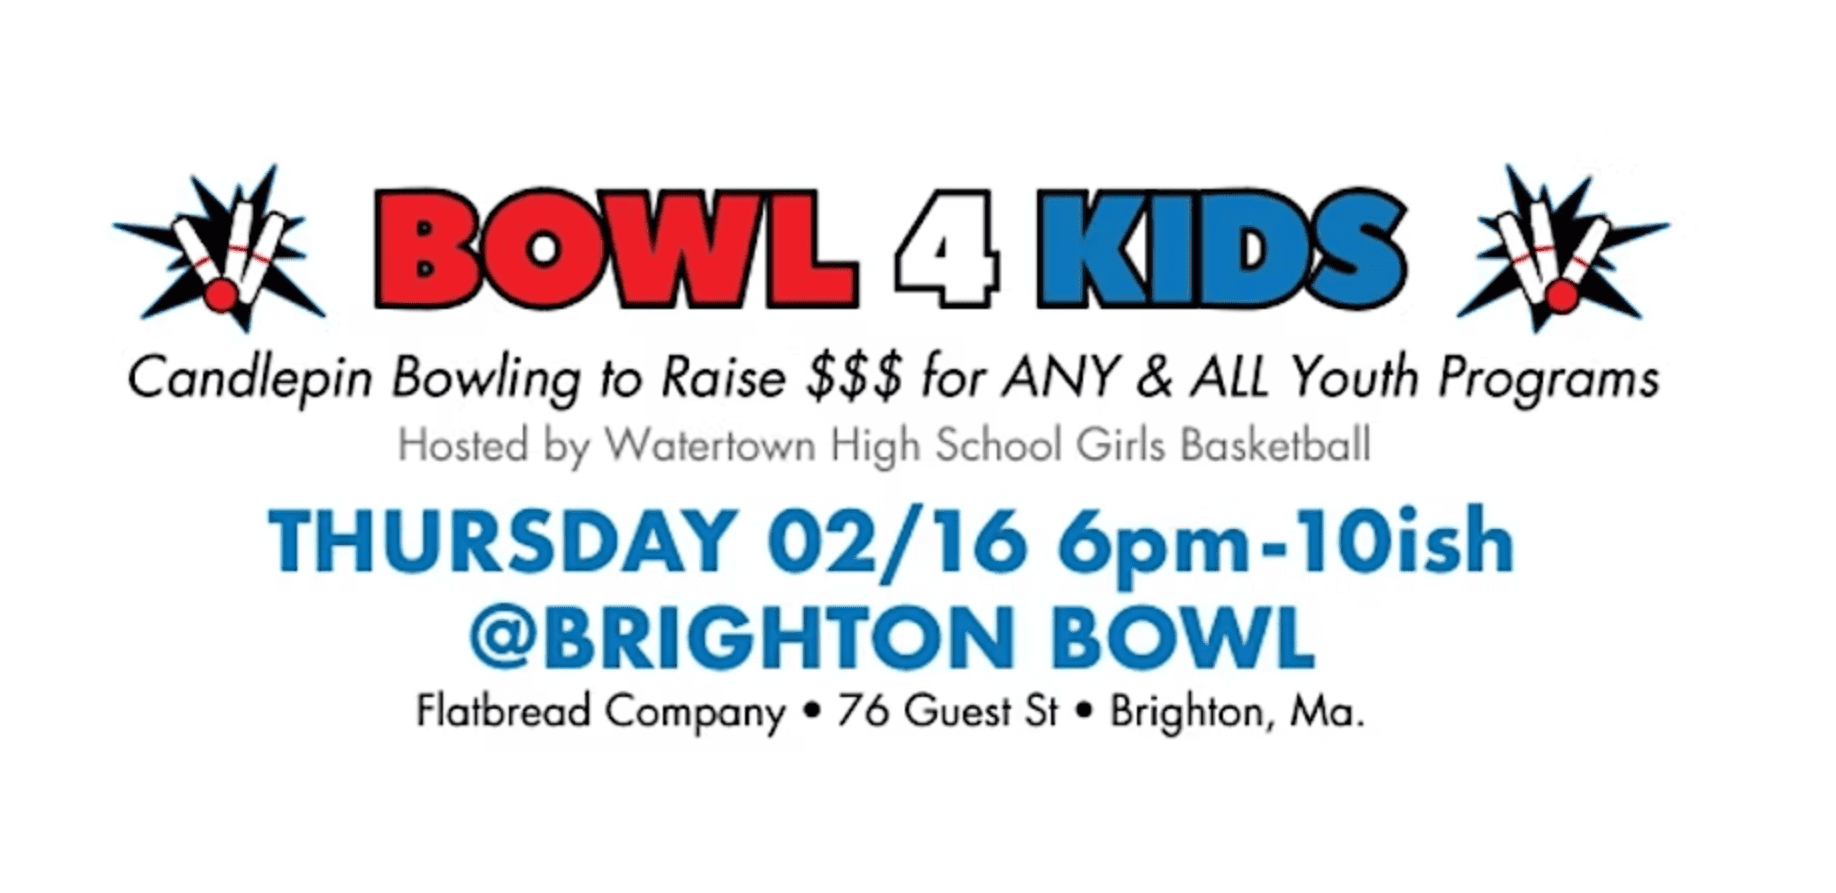 Bowl 4 Kids - Fundraiser for ANY & ALL Youth Programs